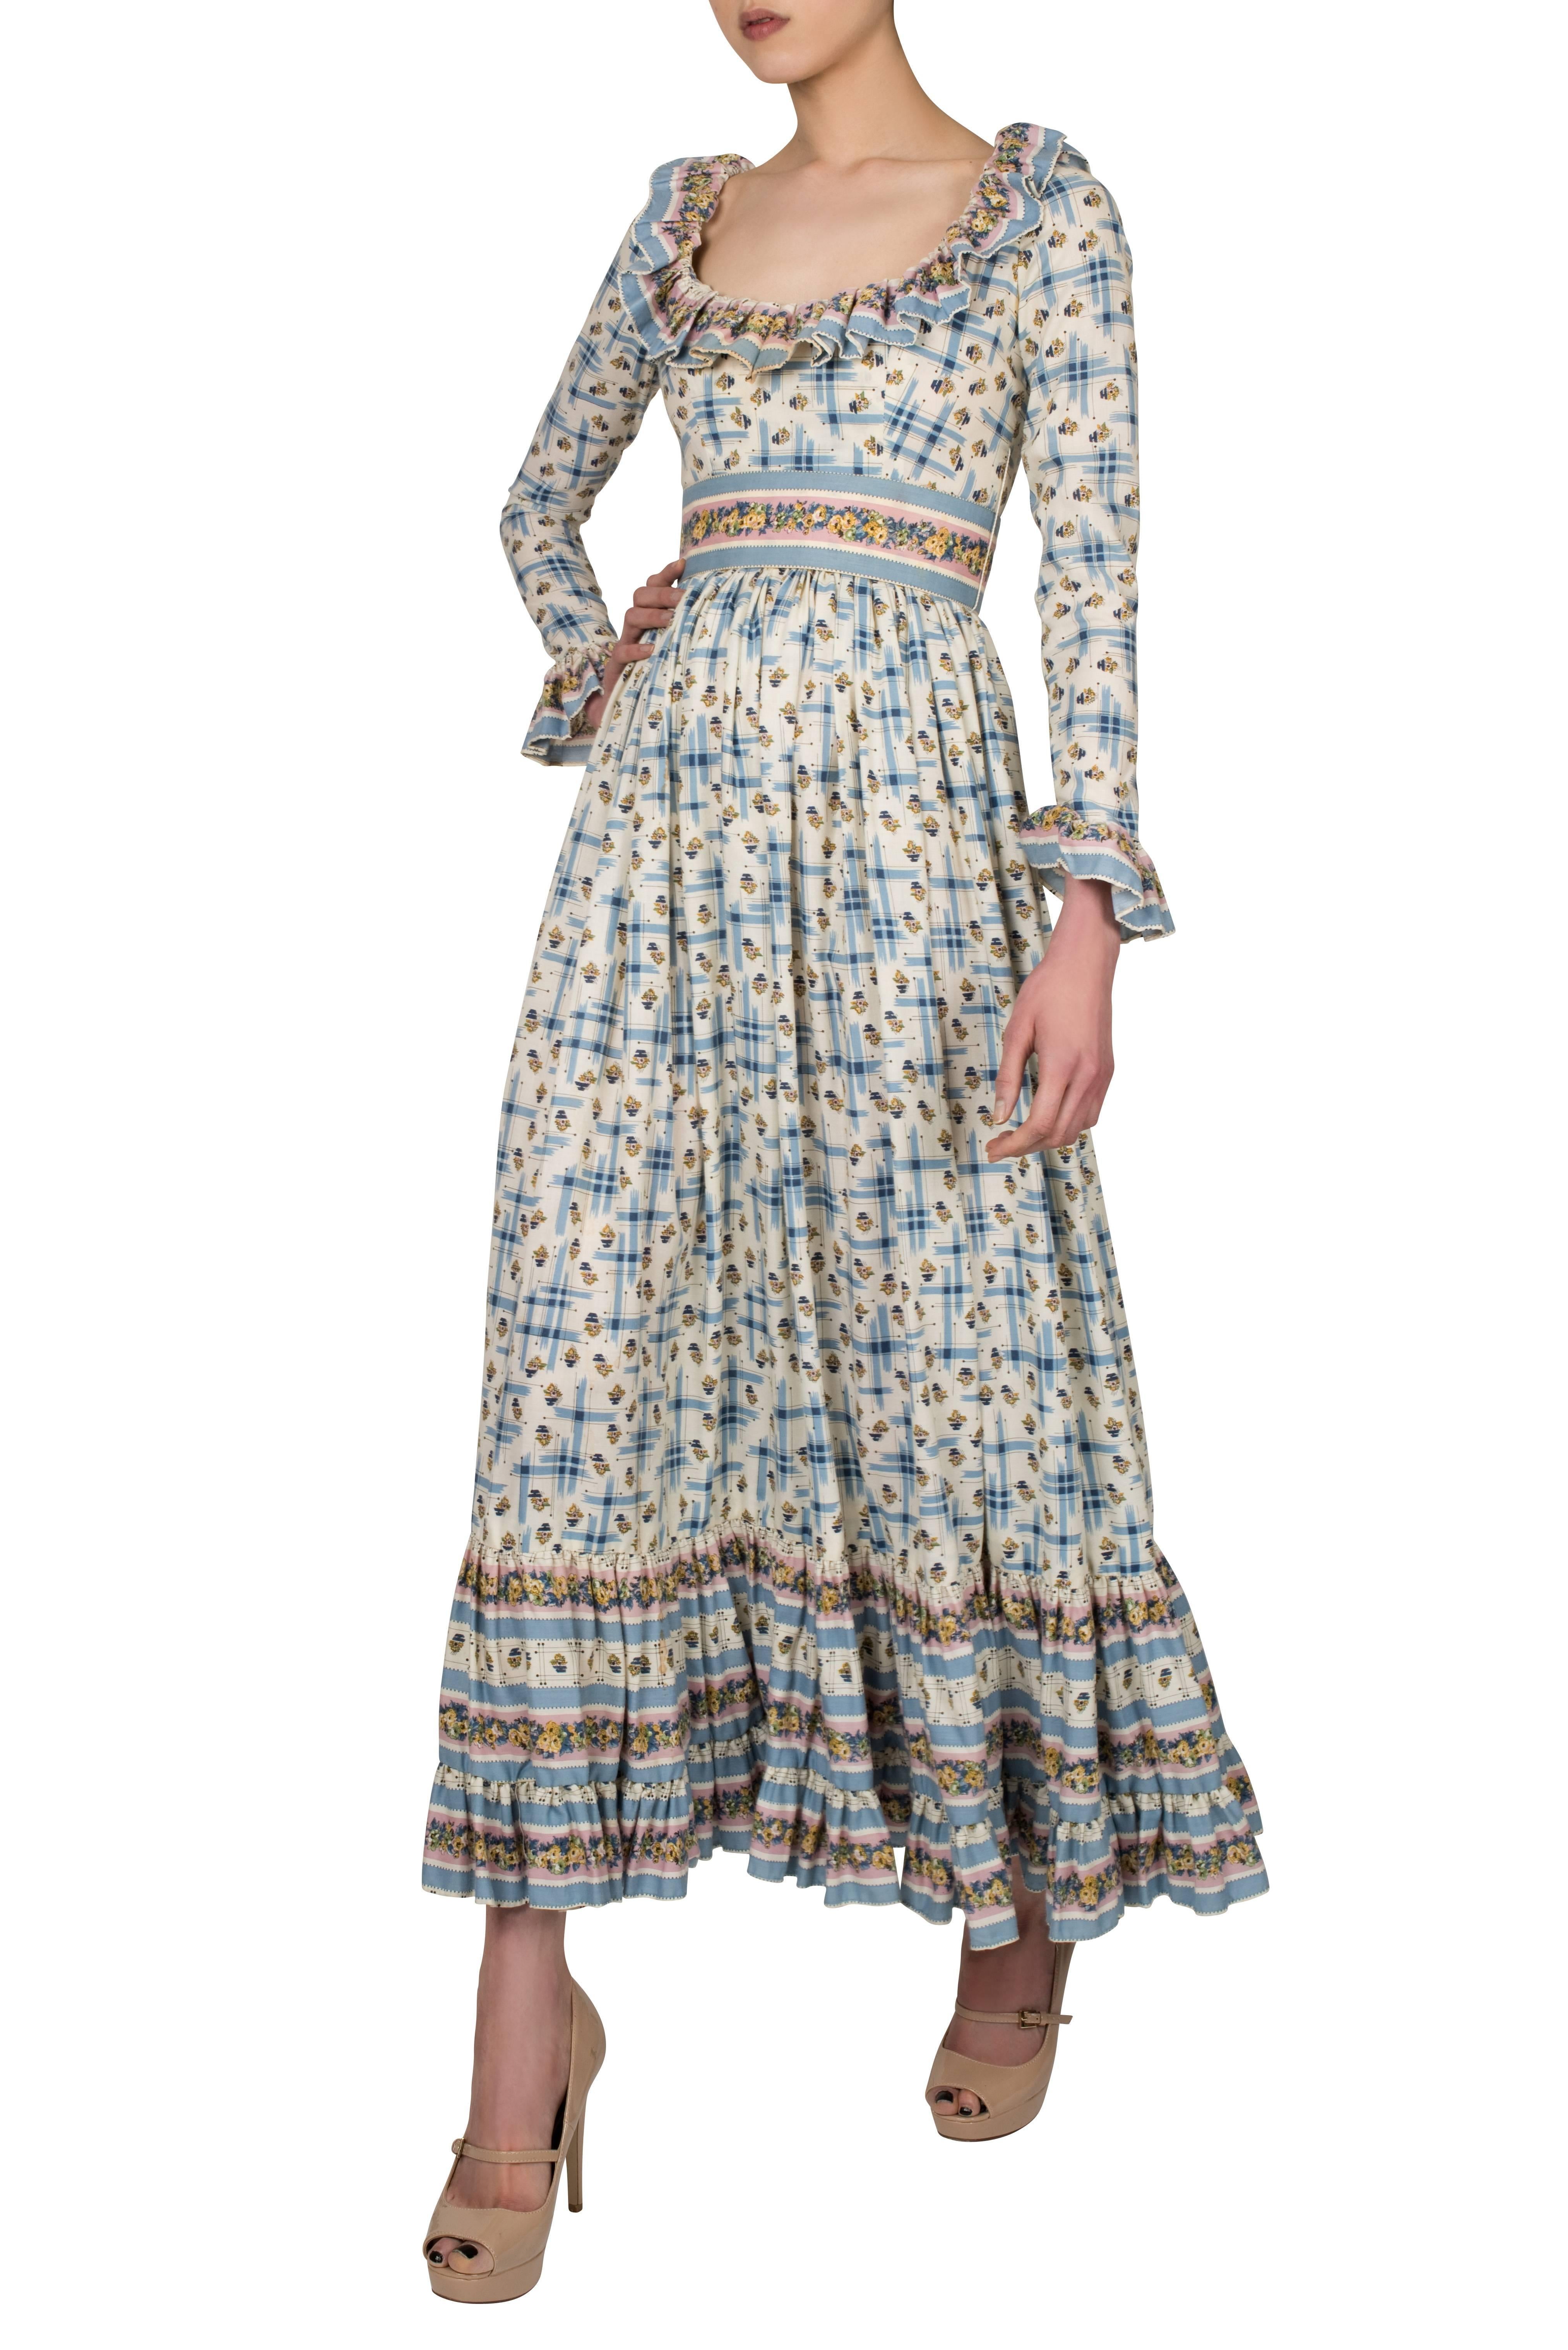 Romantic 1970's dress by Victor Costa in prairie style, in a soft cotton blend, possibly cotton and viscose (no fabric label) with a dainty floral pattern in ivory, pink and blue. The dress has a very flattering round décolletage decorated with a